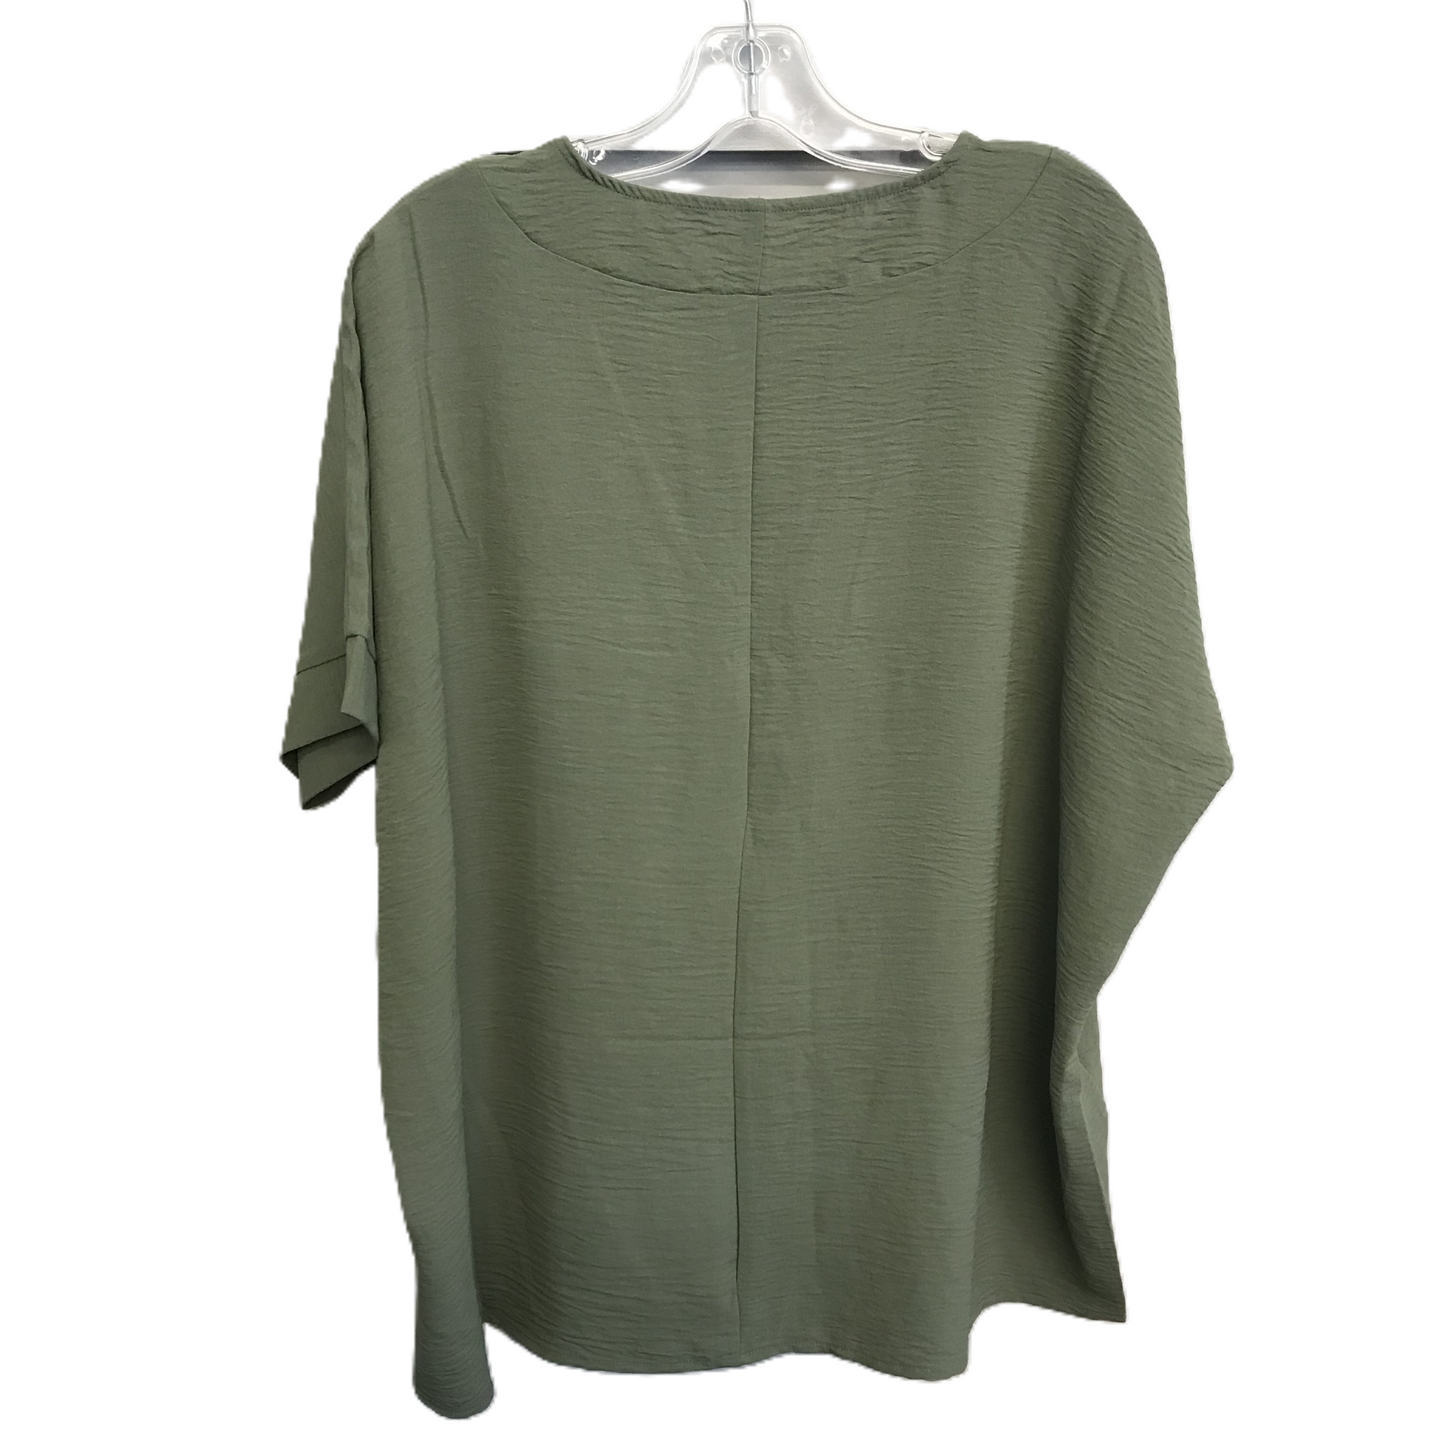 Green Top Short Sleeve By Zenana Outfitters, Size: S